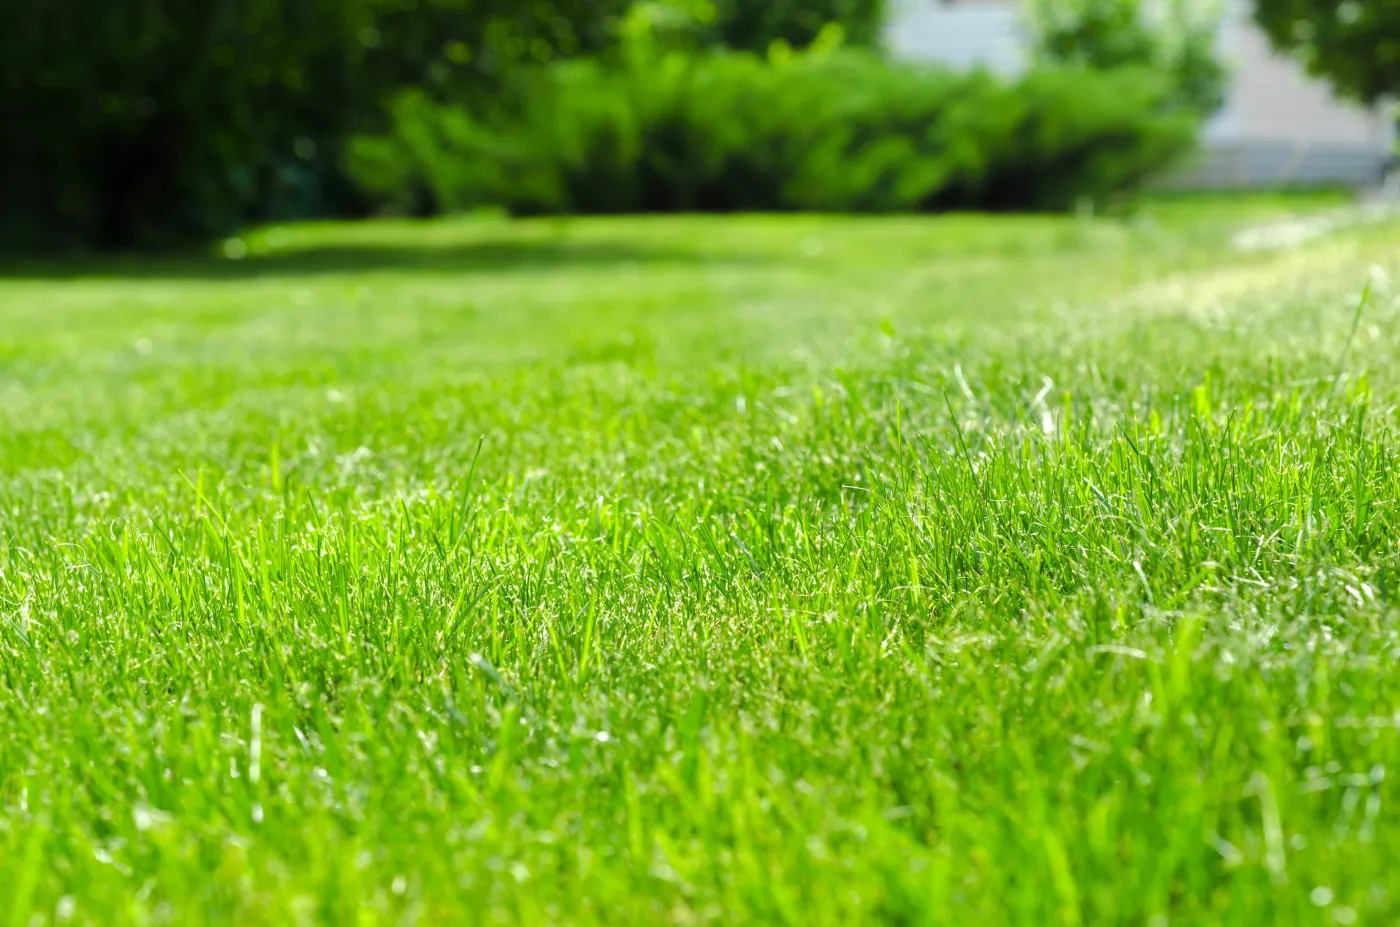 Does Your Alachua, FL Outdoor Area Need Pest Control? Search Lawn Service Near Me for Help